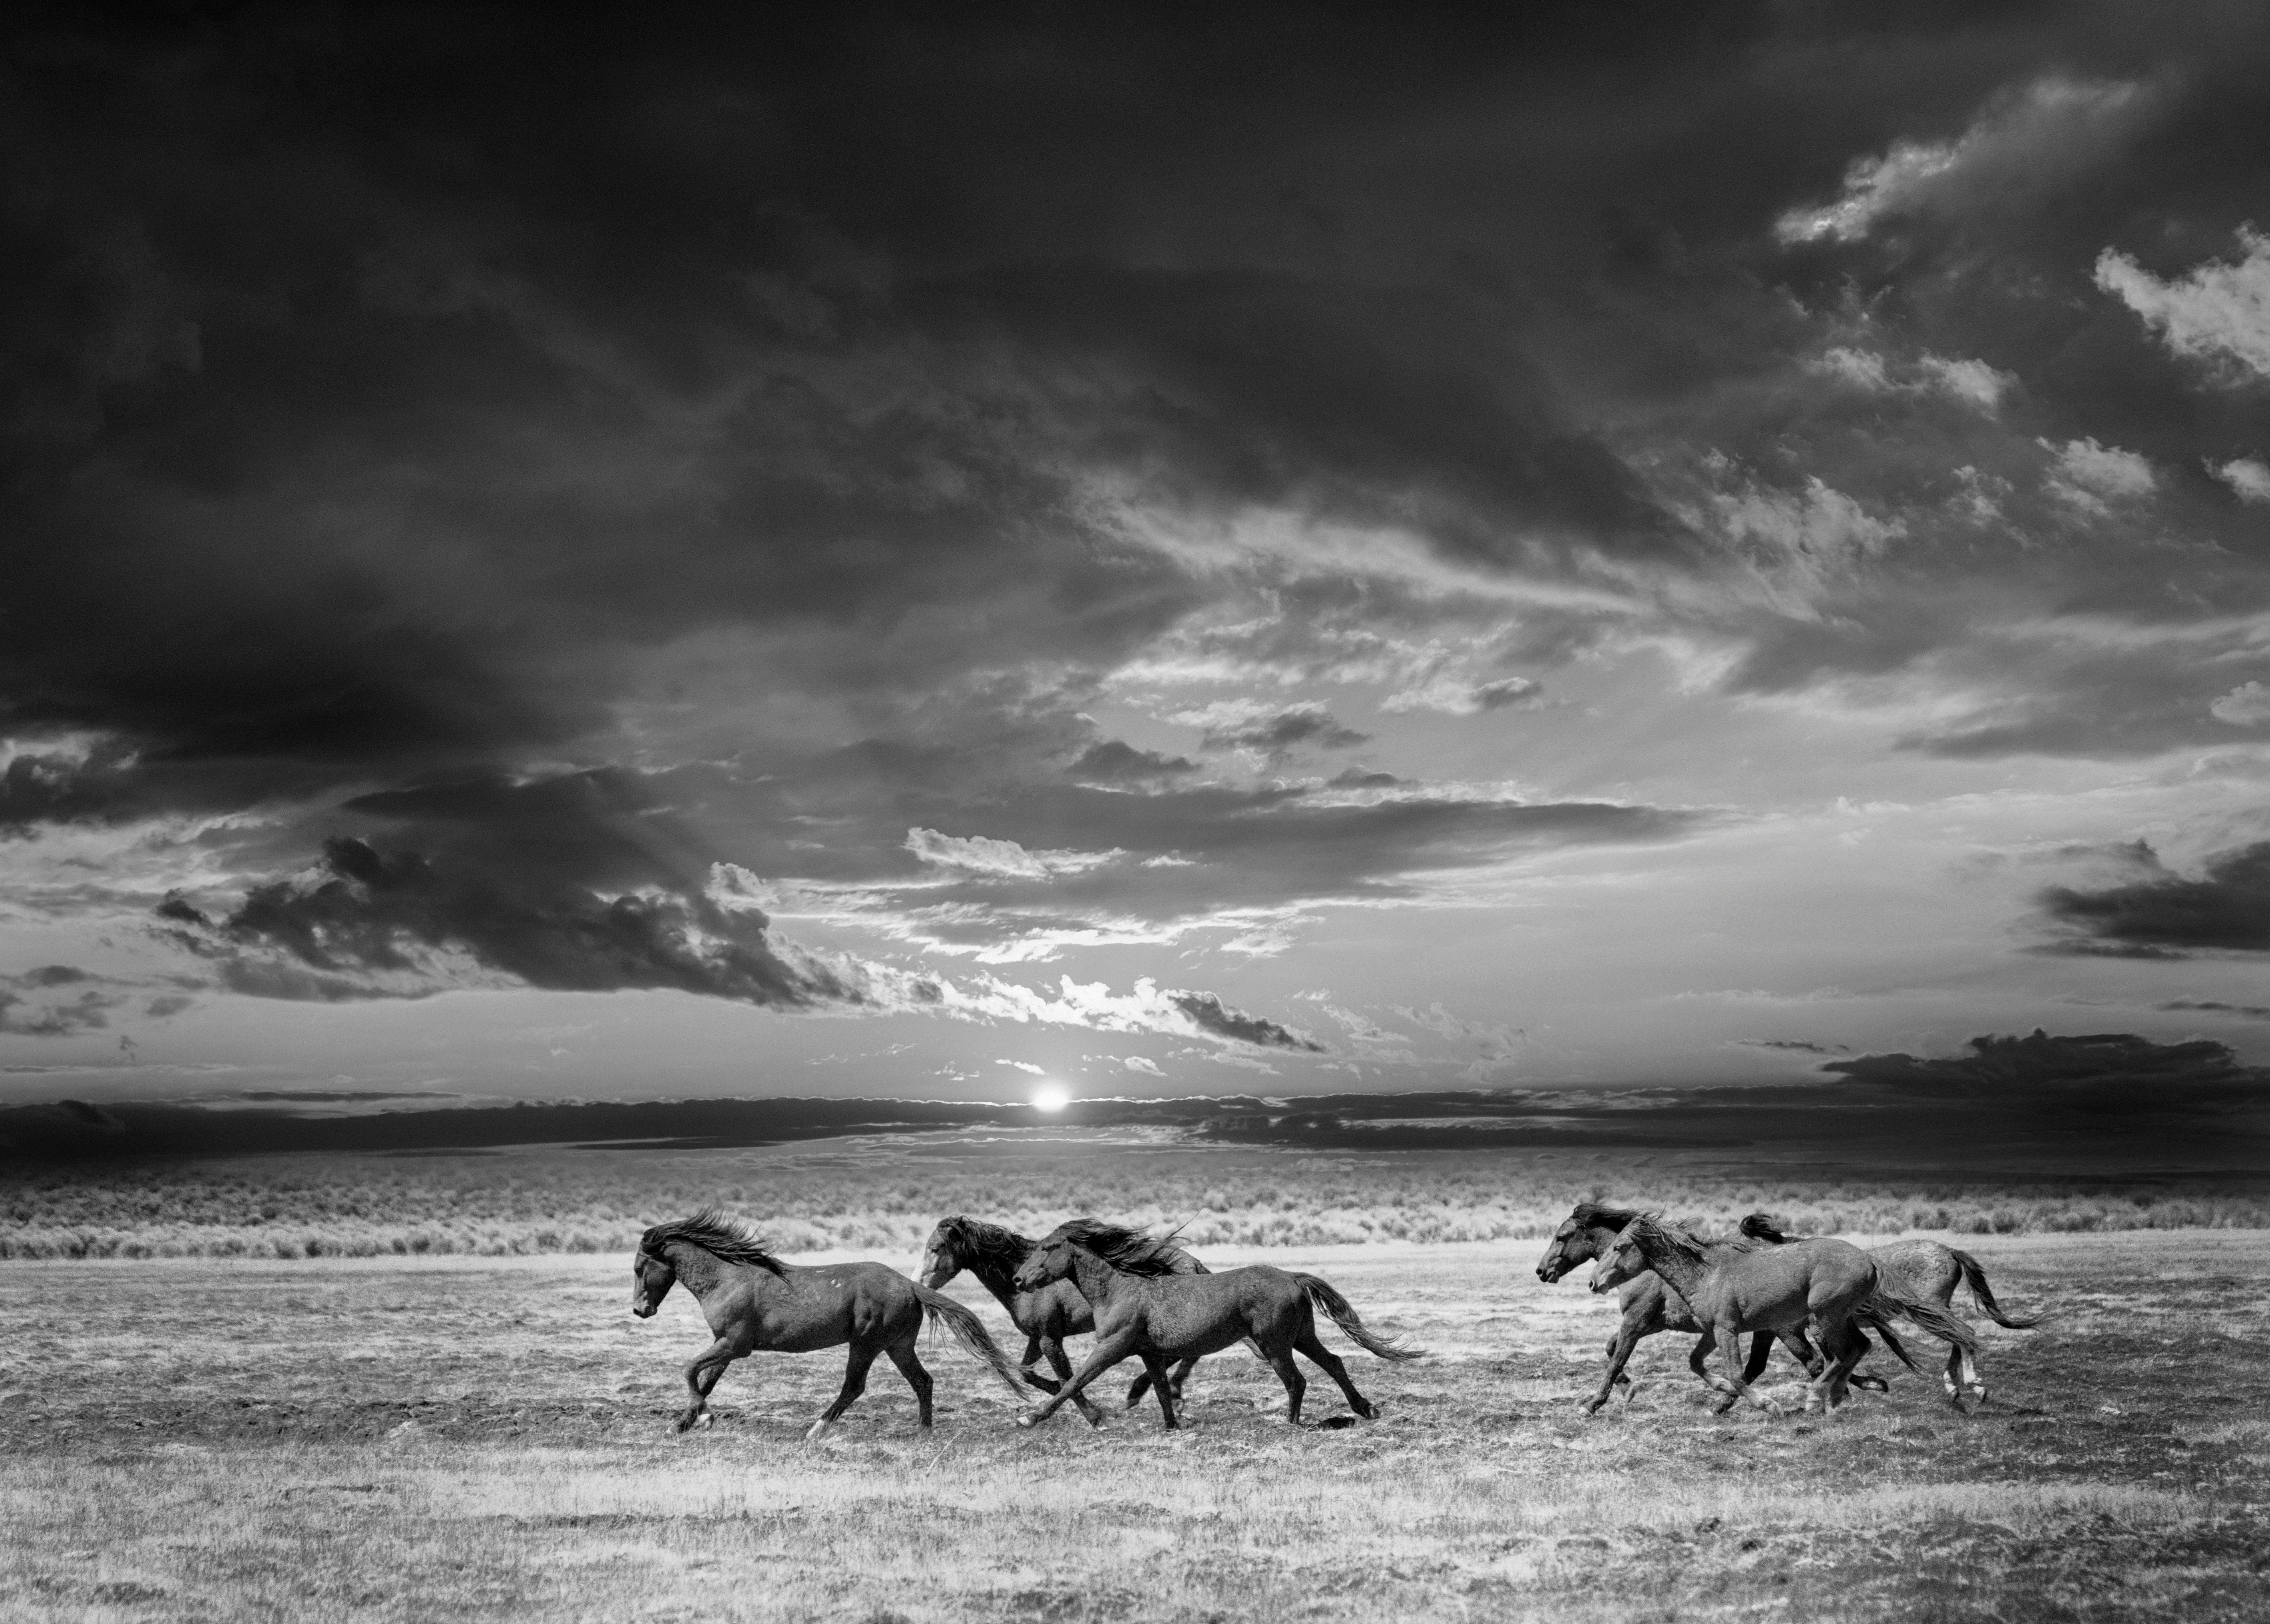 Shane Russeck Animal Print - Photography Wild Horses 40x50 "Chasing the Light" Mustangs Photograph Unsigned